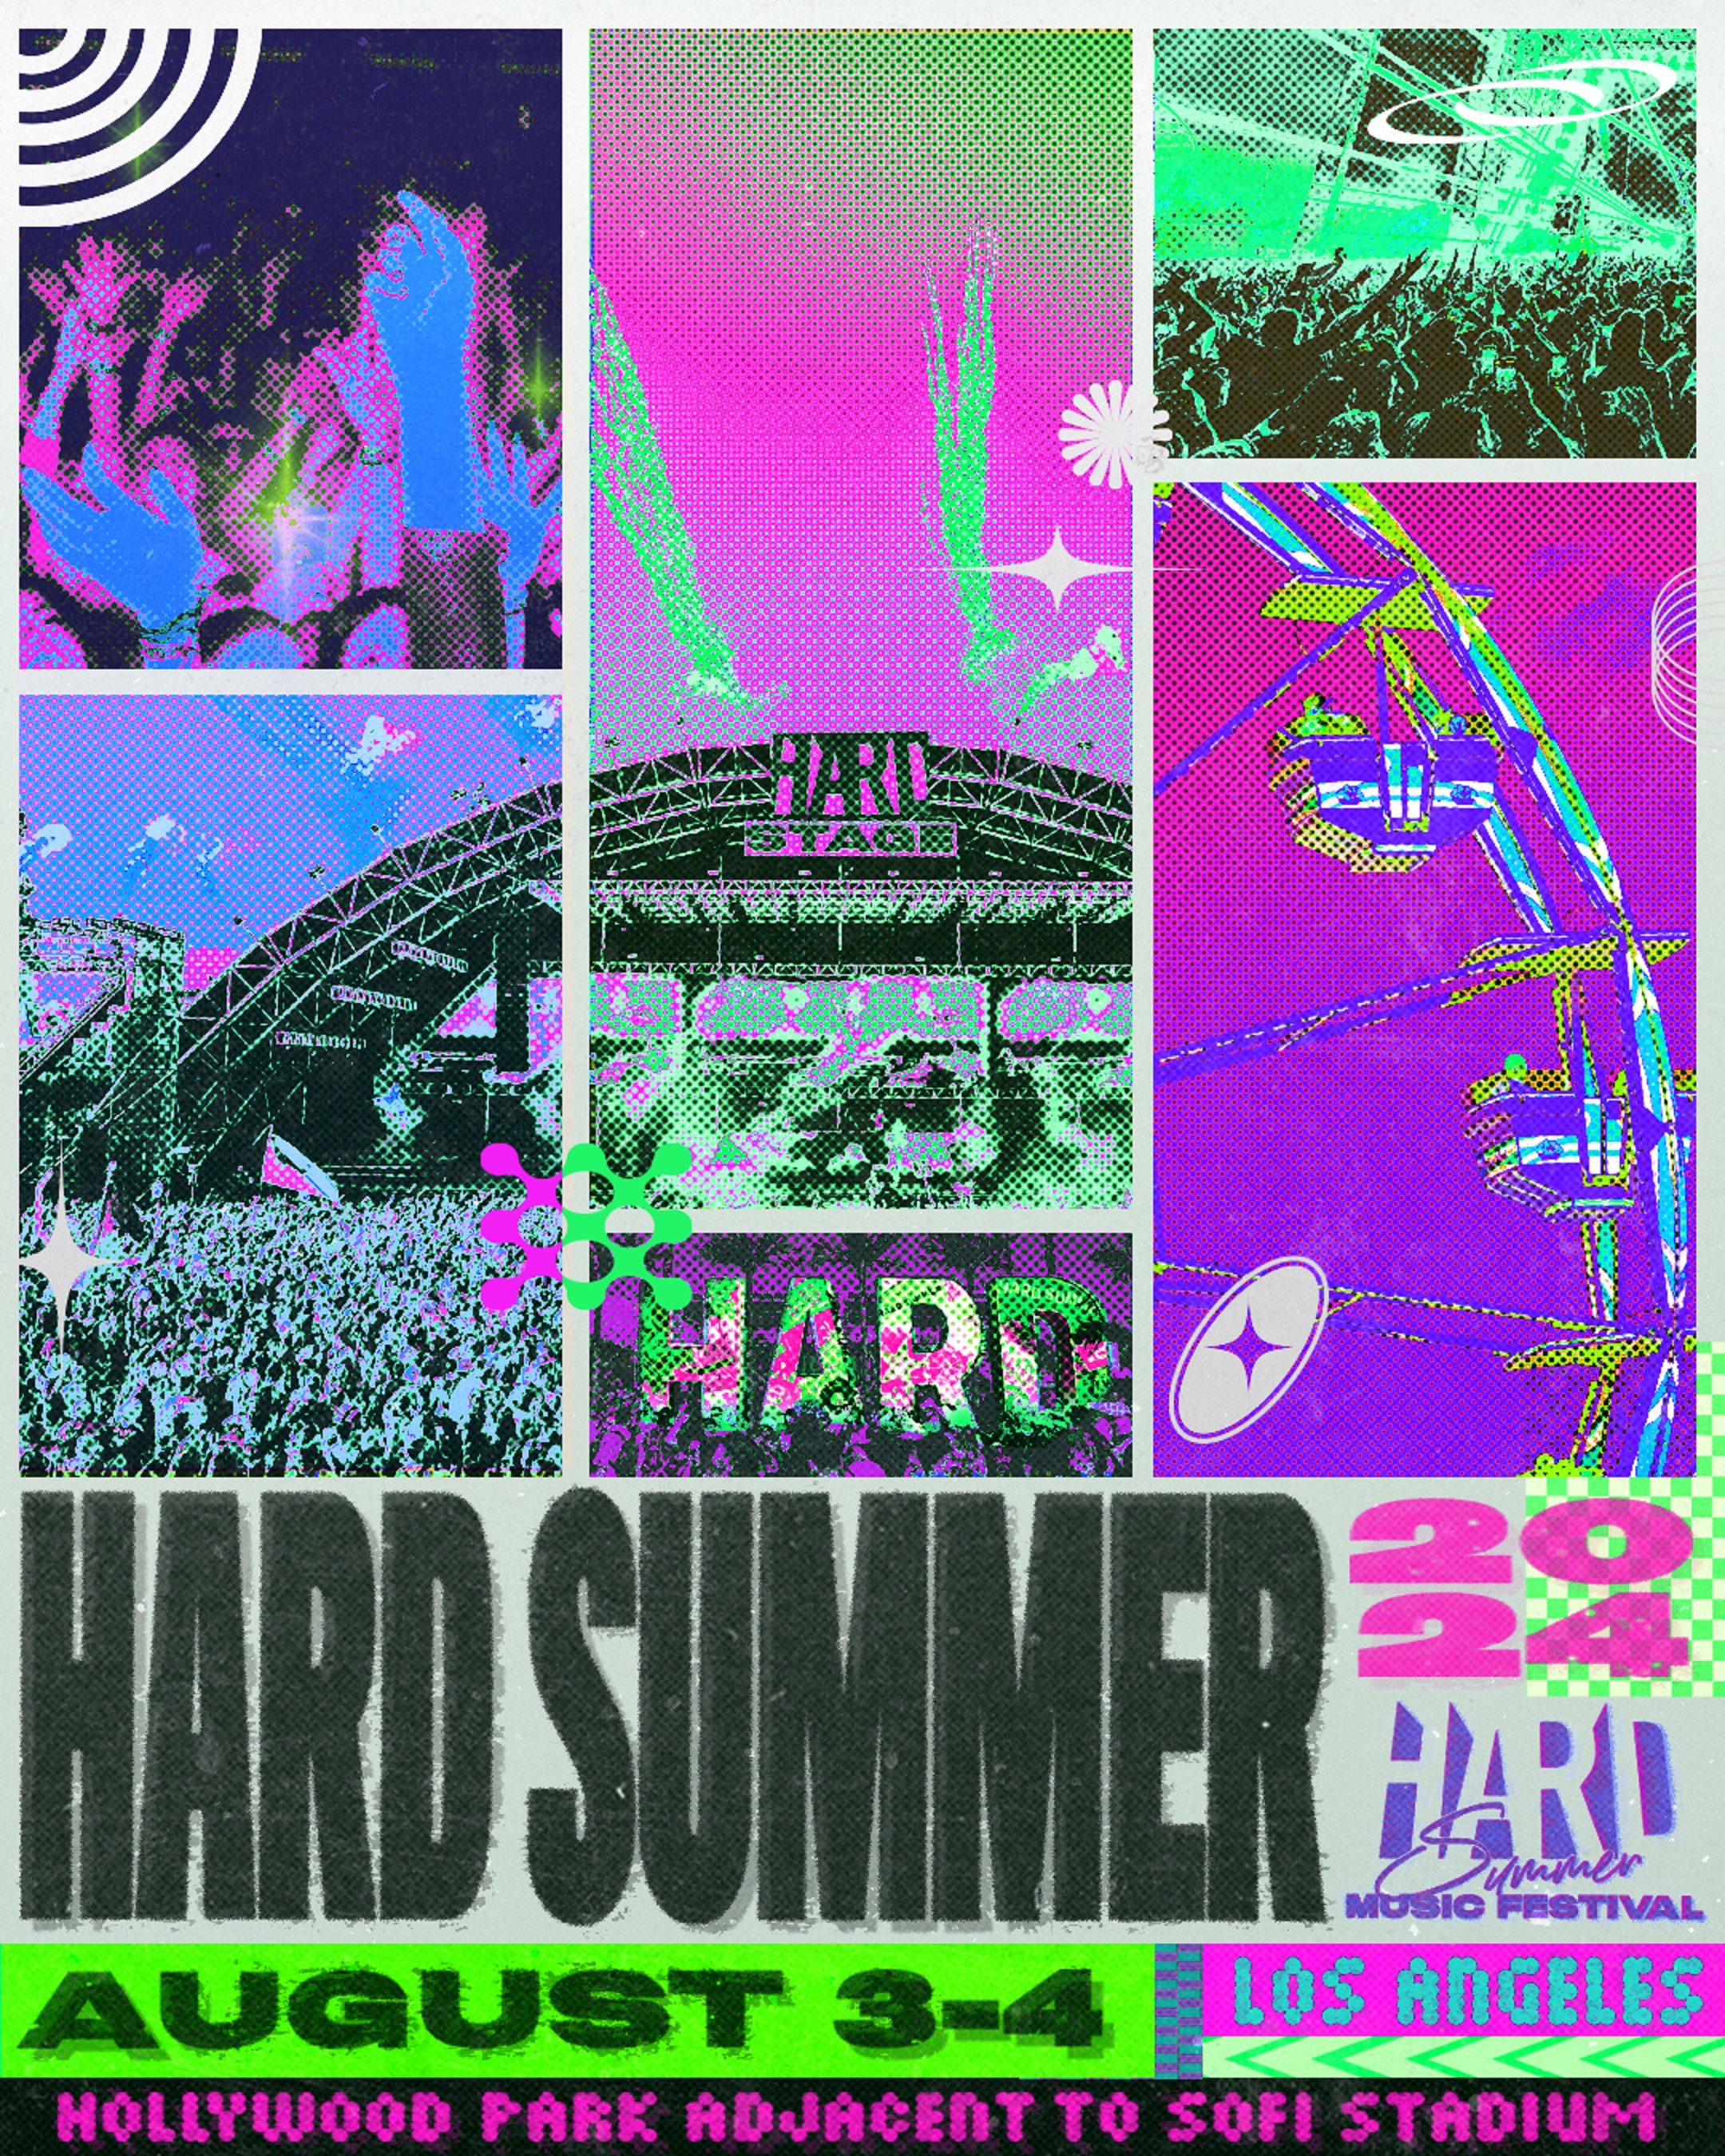 HARD Summer Music Festival Announces Dates and New Venue for 2024 Edition